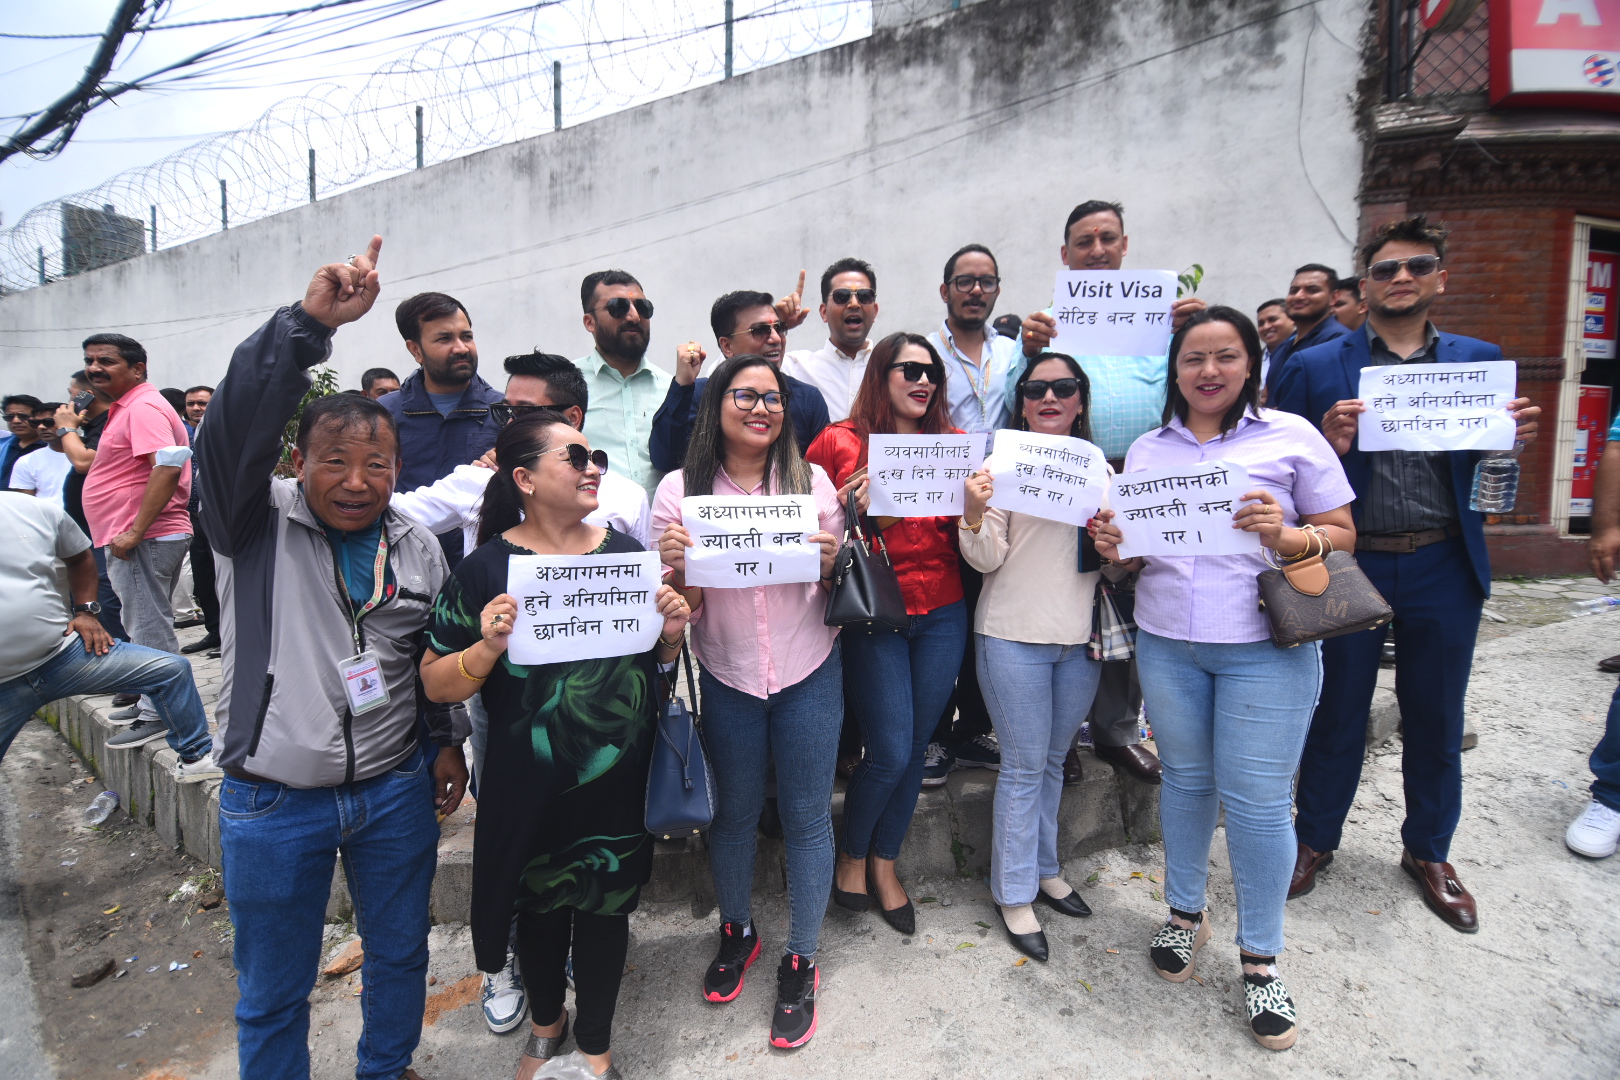 Foreign employment professionals encircled immigration office (photos)